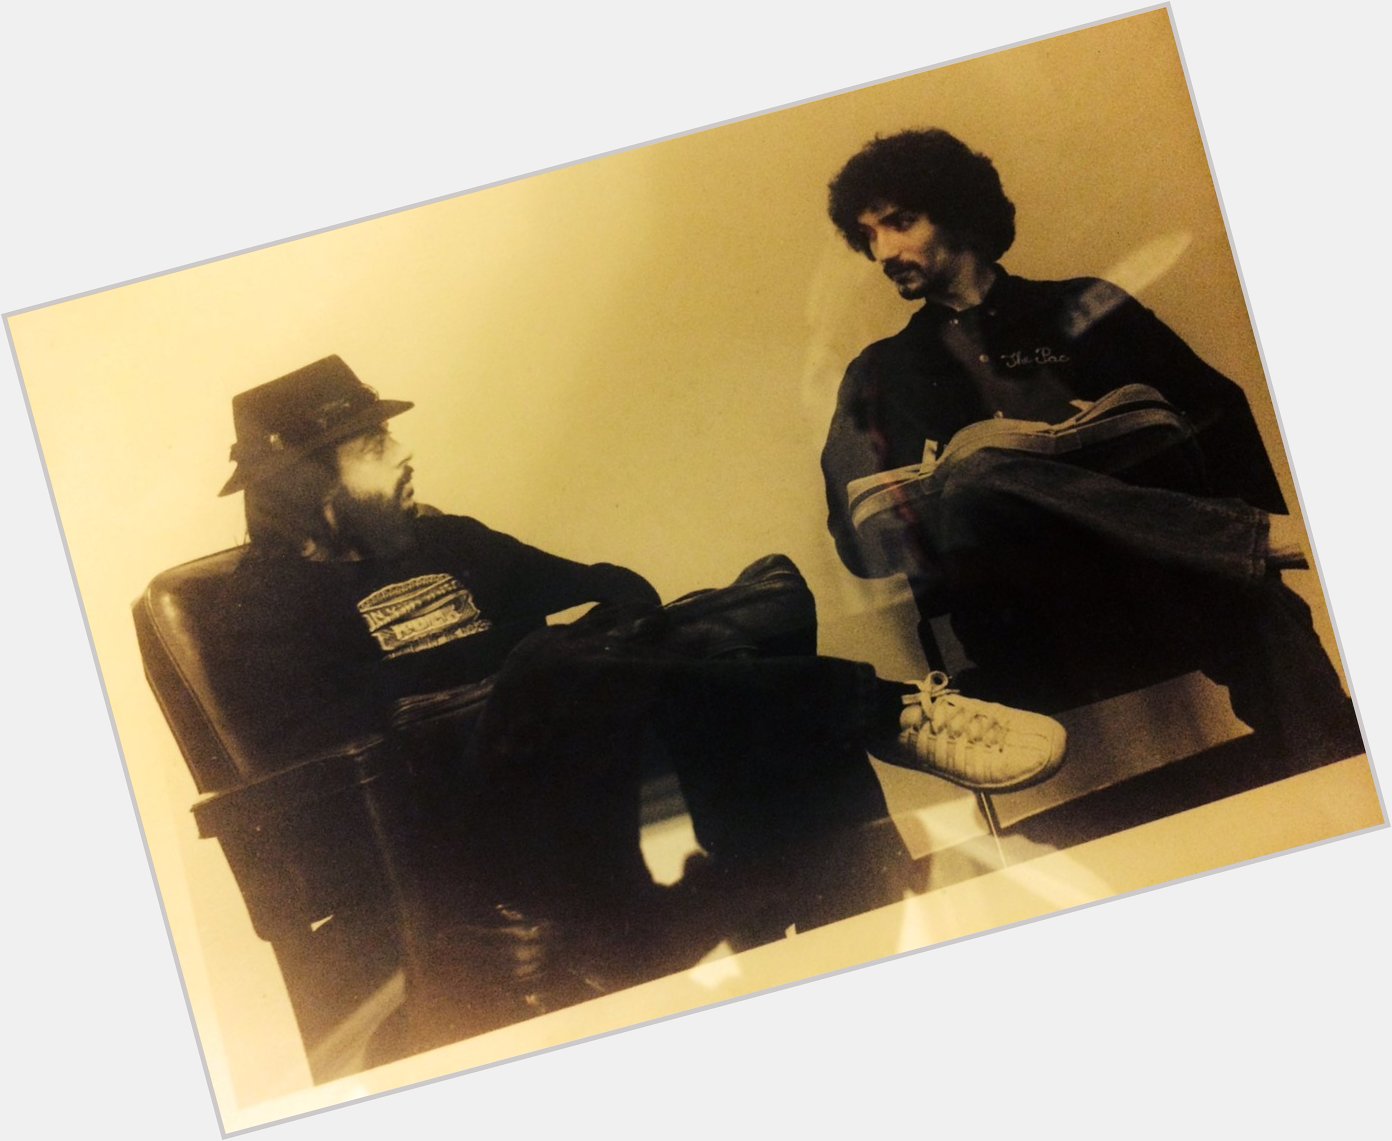 Happy 82nd birthday to trumpeter Chuck Mangione. Seen here with me, his A&M Records promo man, St.Louis 1978. 